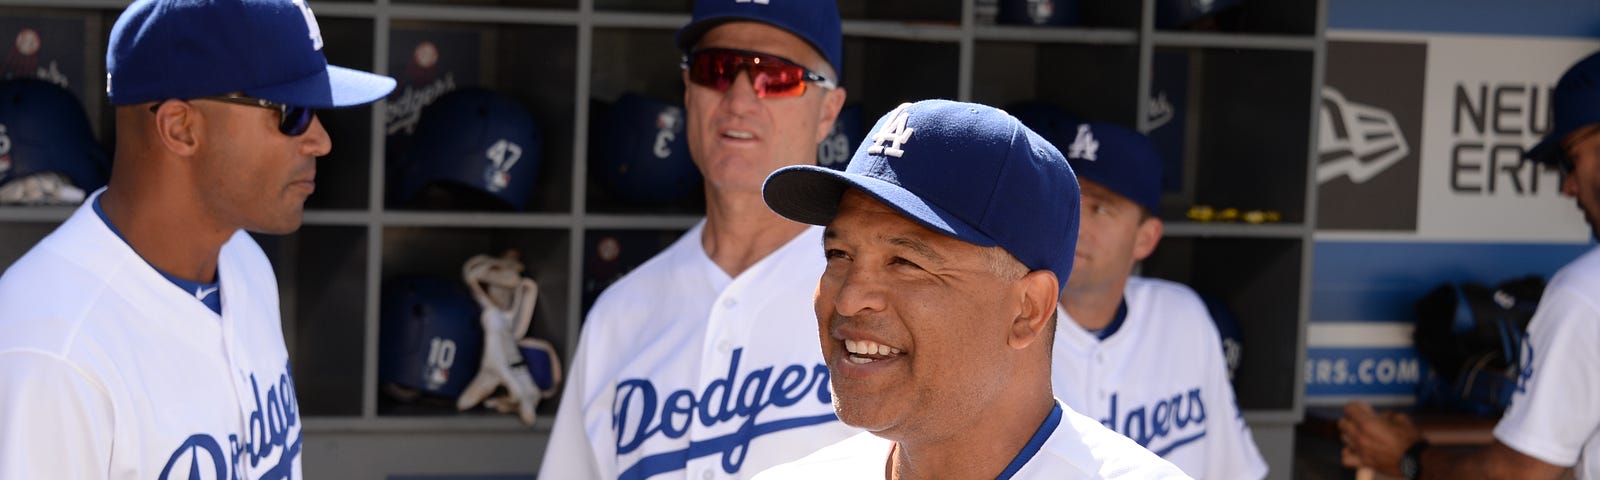 By bucking rookie manager history, Dave Roberts would be making history, by Cary Osborne